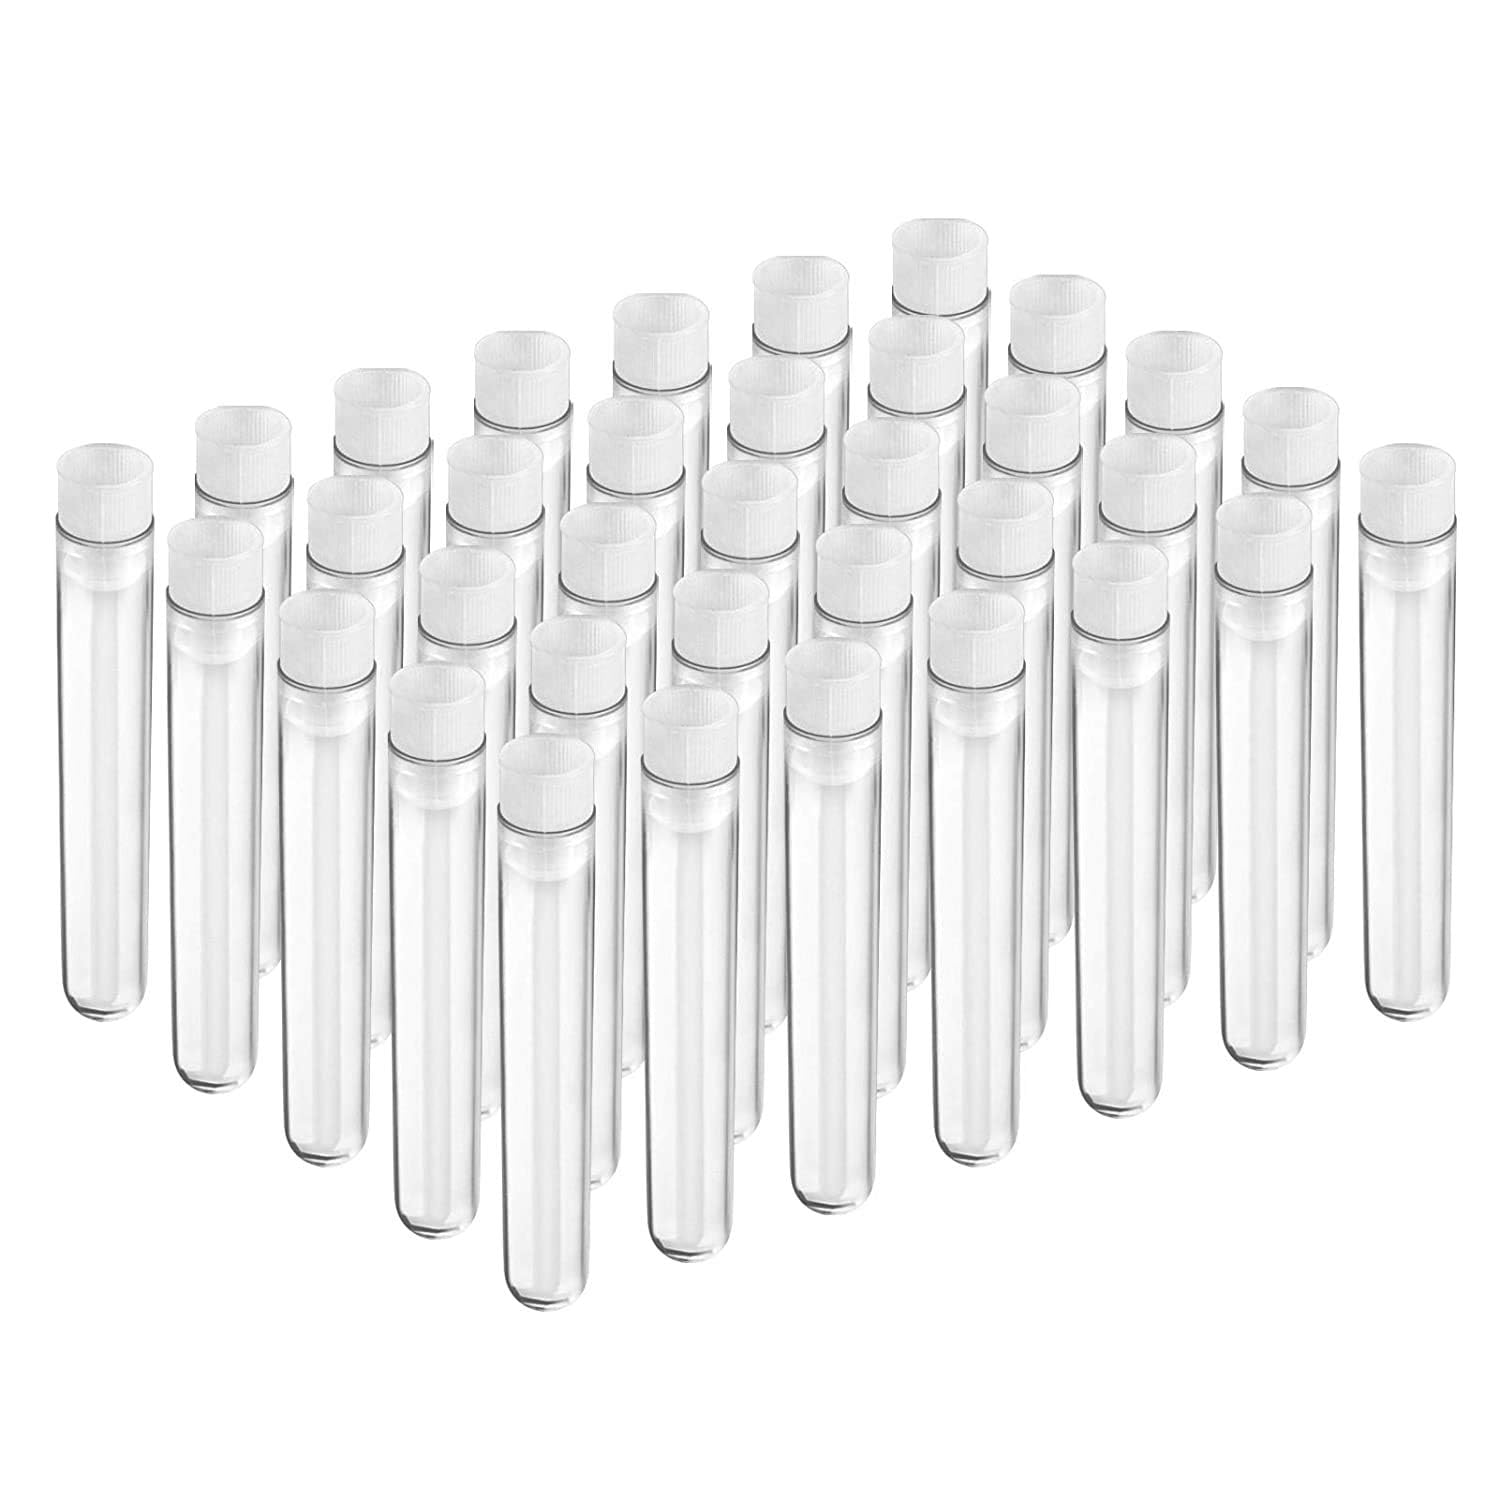 ADAMAS BETA 20pcs 12x100mm Clear Plastic Test Tubes with Caps for Scie